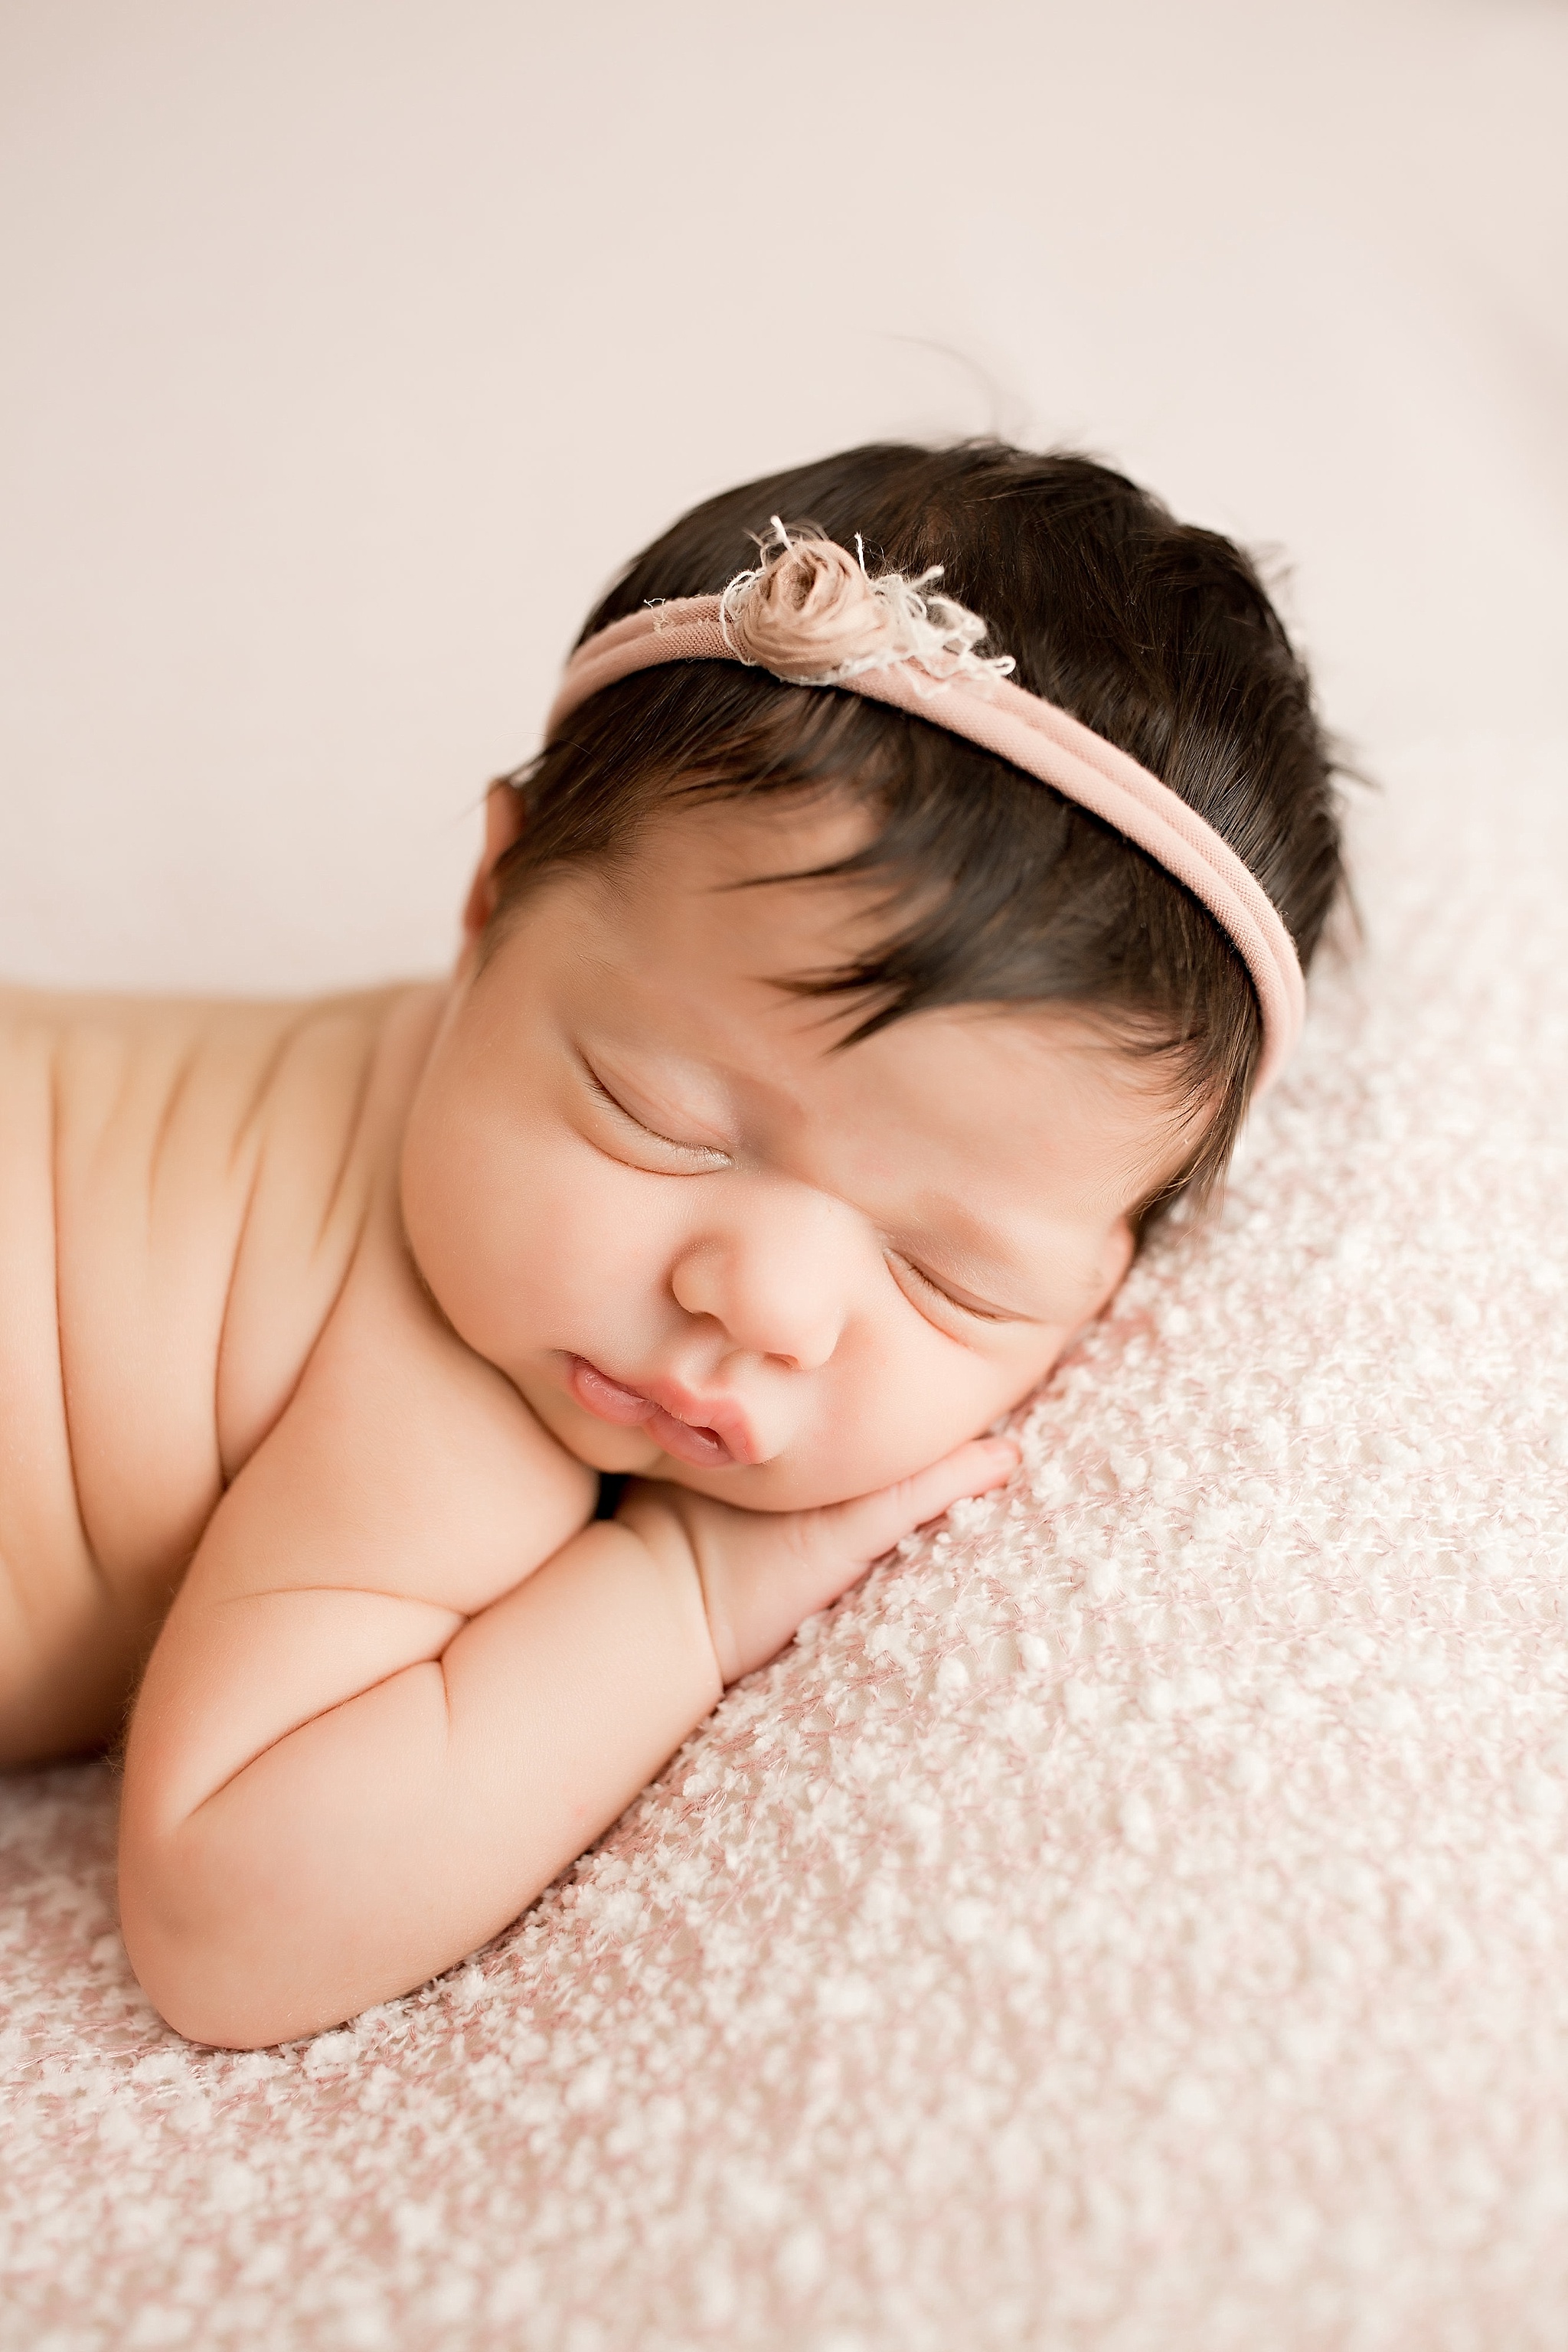 baby girl with rolls sleeping with floral headband